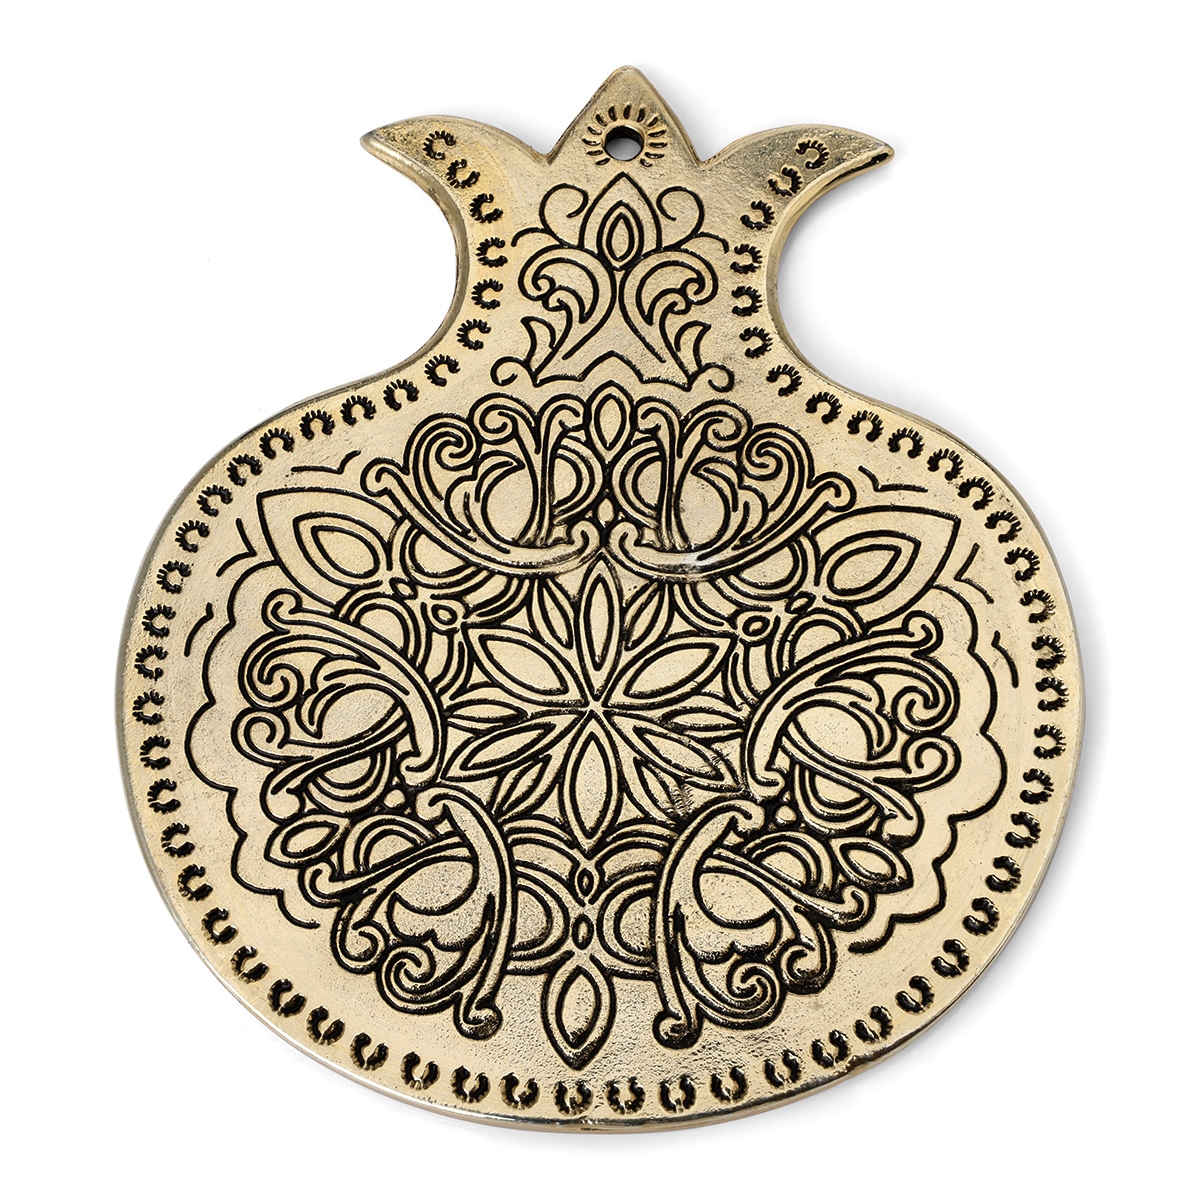 Israel Museum Gold-Plated Pomegranate Amulet Wall Hanging - 1